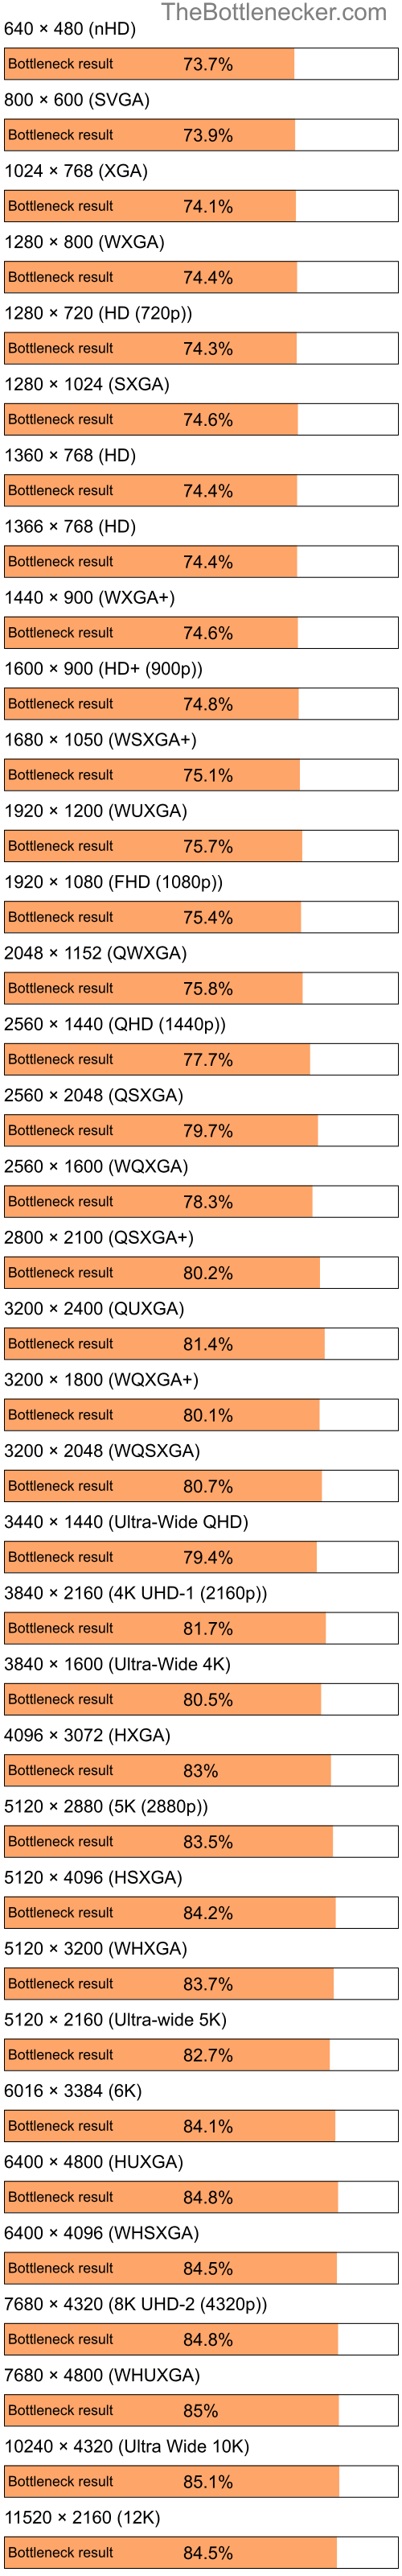 Bottleneck results by resolution for Intel Pentium 4 and AMD Radeon 3100 in Graphic Card Intense Tasks